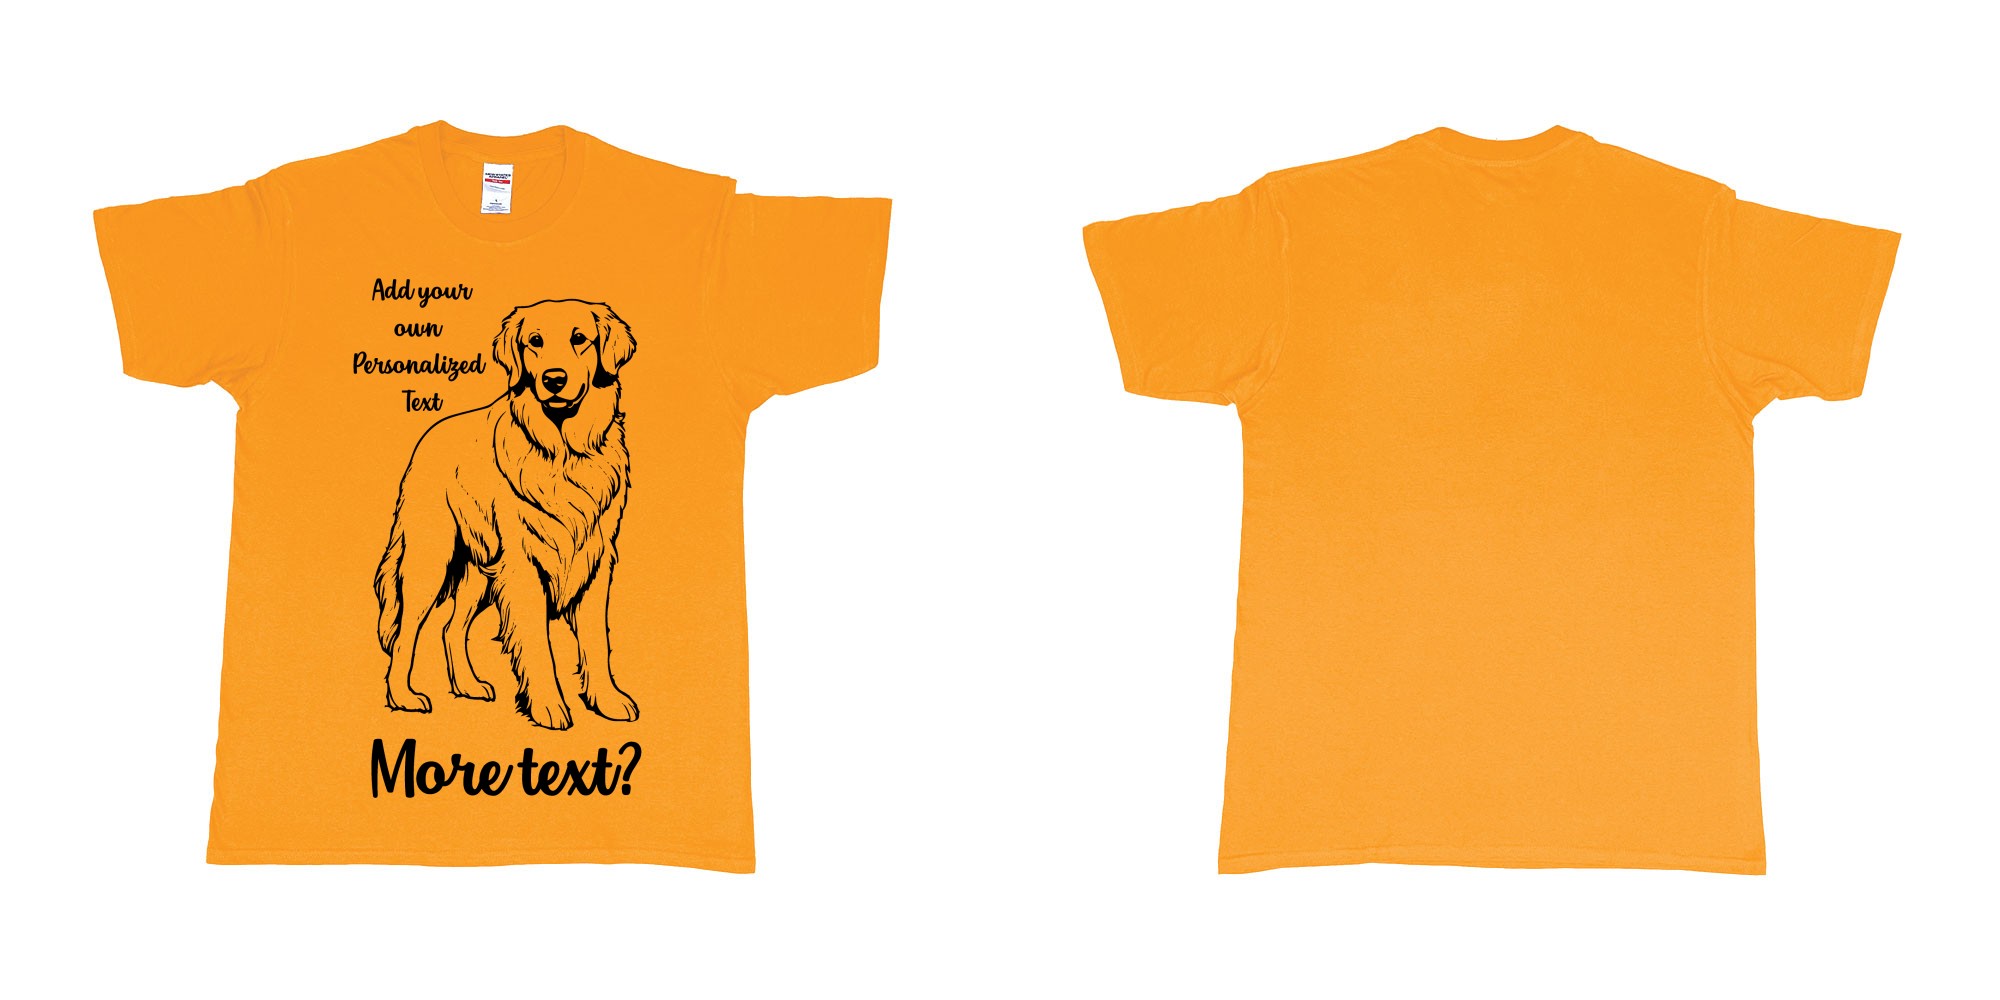 Custom tshirt design golden retriever dog breed personalized text in fabric color gold choice your own text made in Bali by The Pirate Way